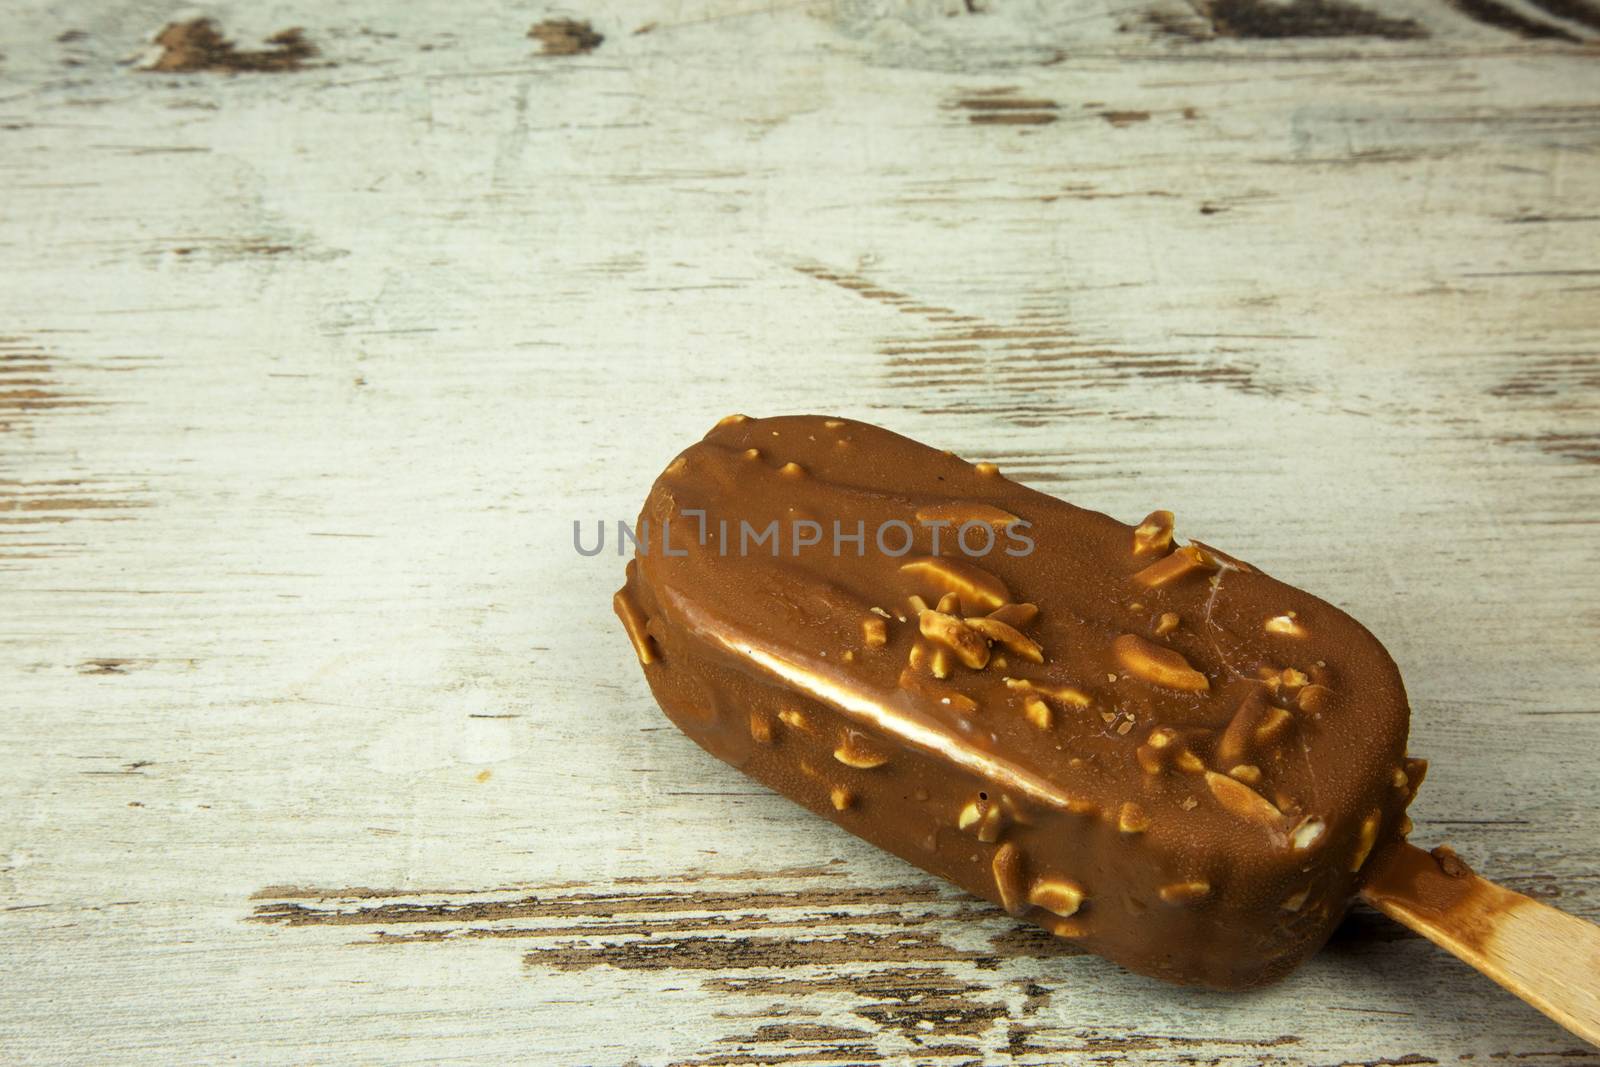 Chocolate ice lolly on a light wooden countertop in vintage style. Flat , horizontal view.